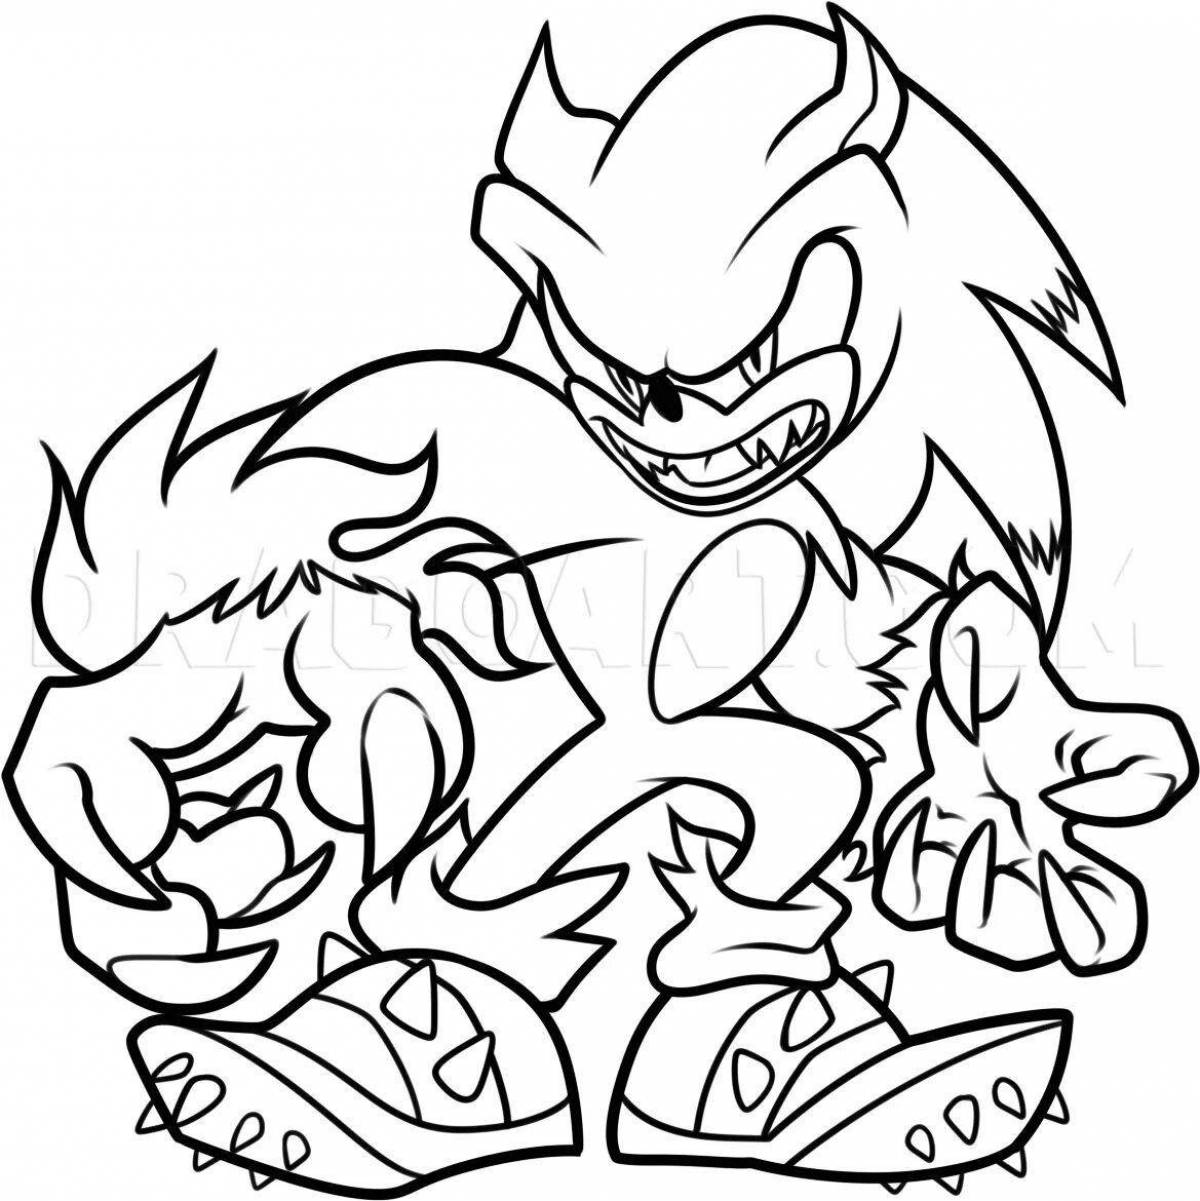 Dynamic sonic shredder coloring page